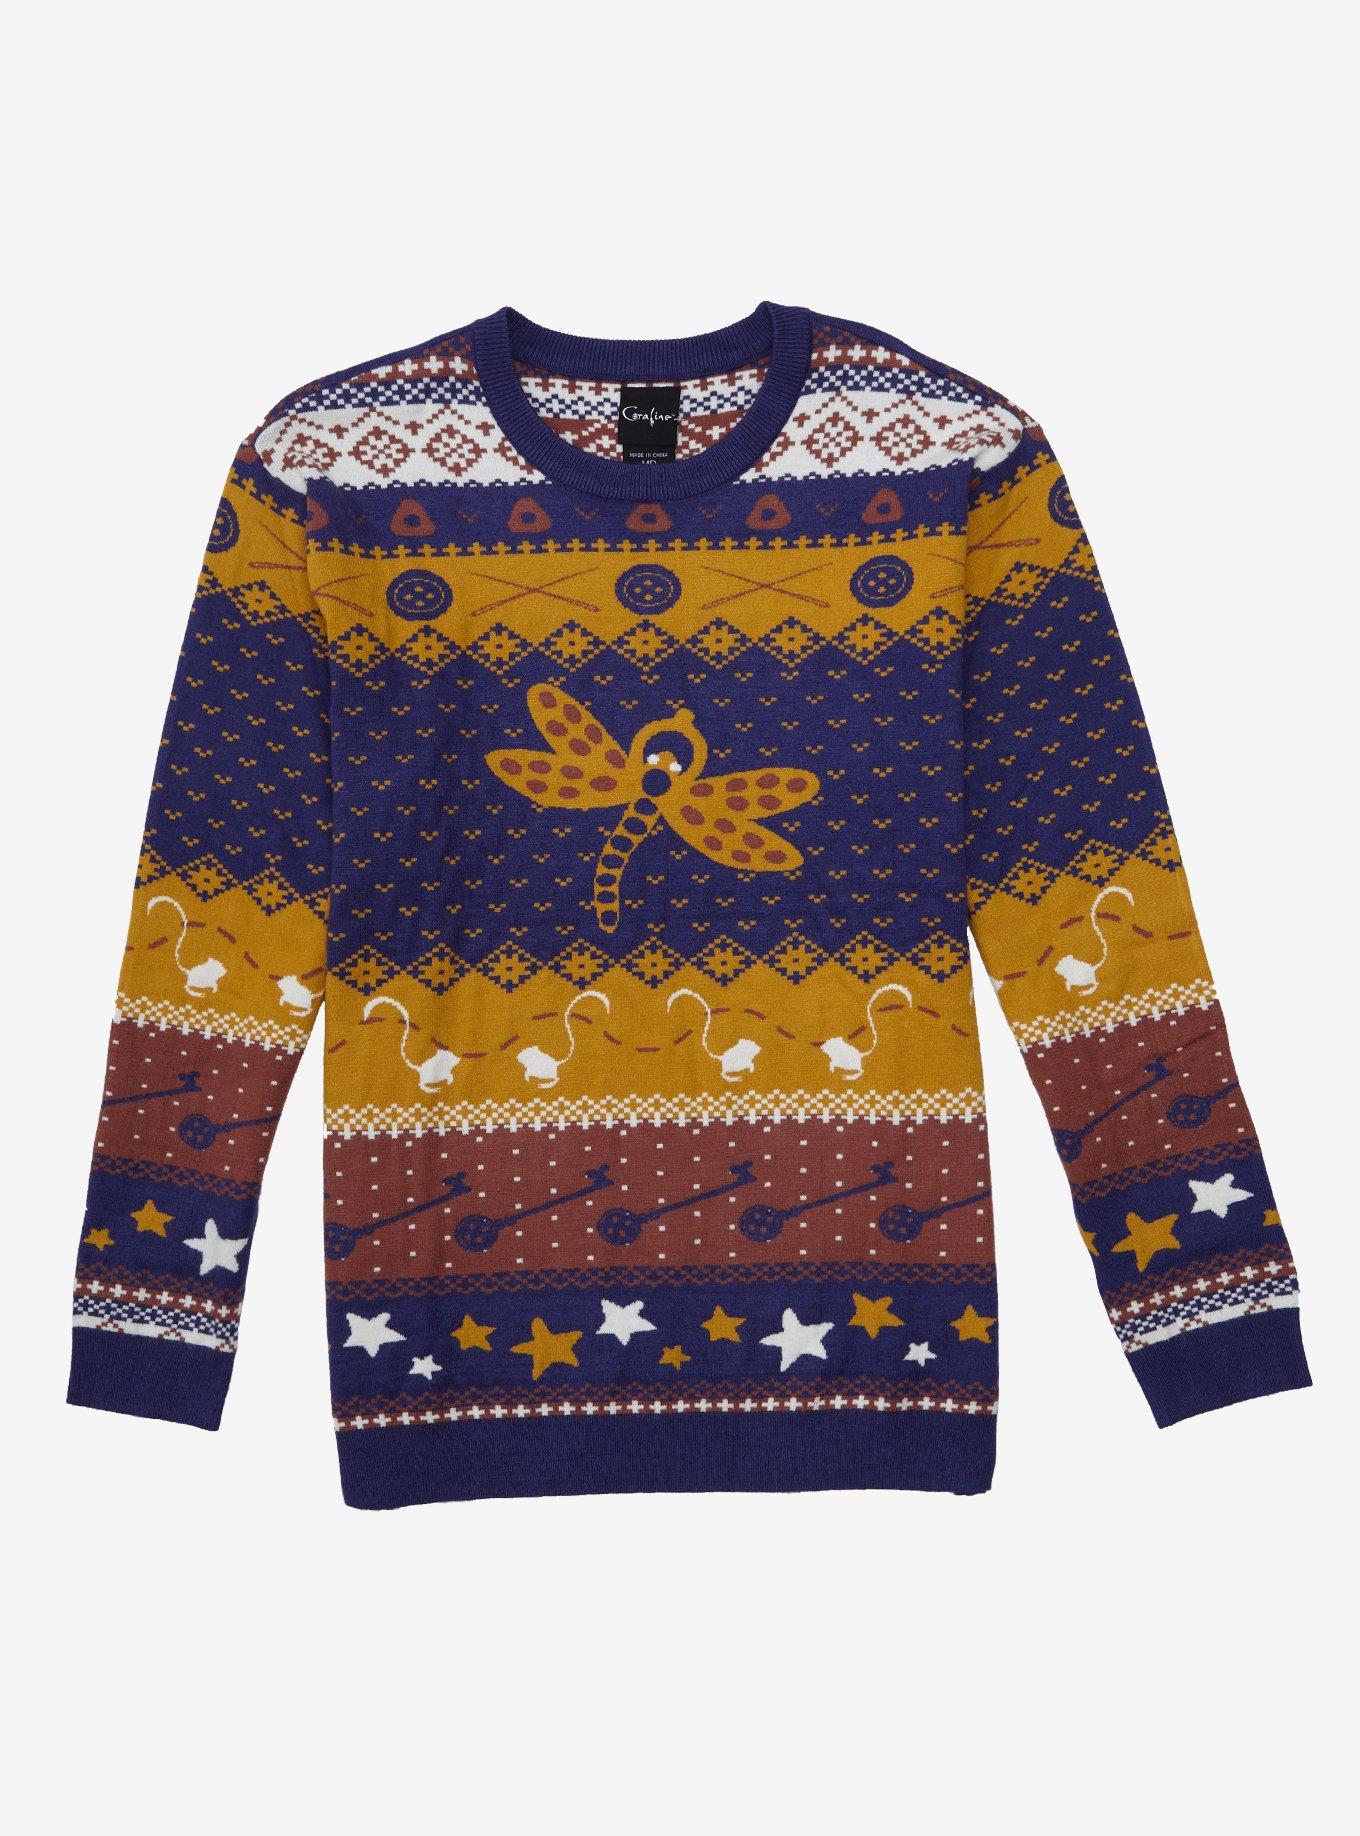 Coraline ugly sweater